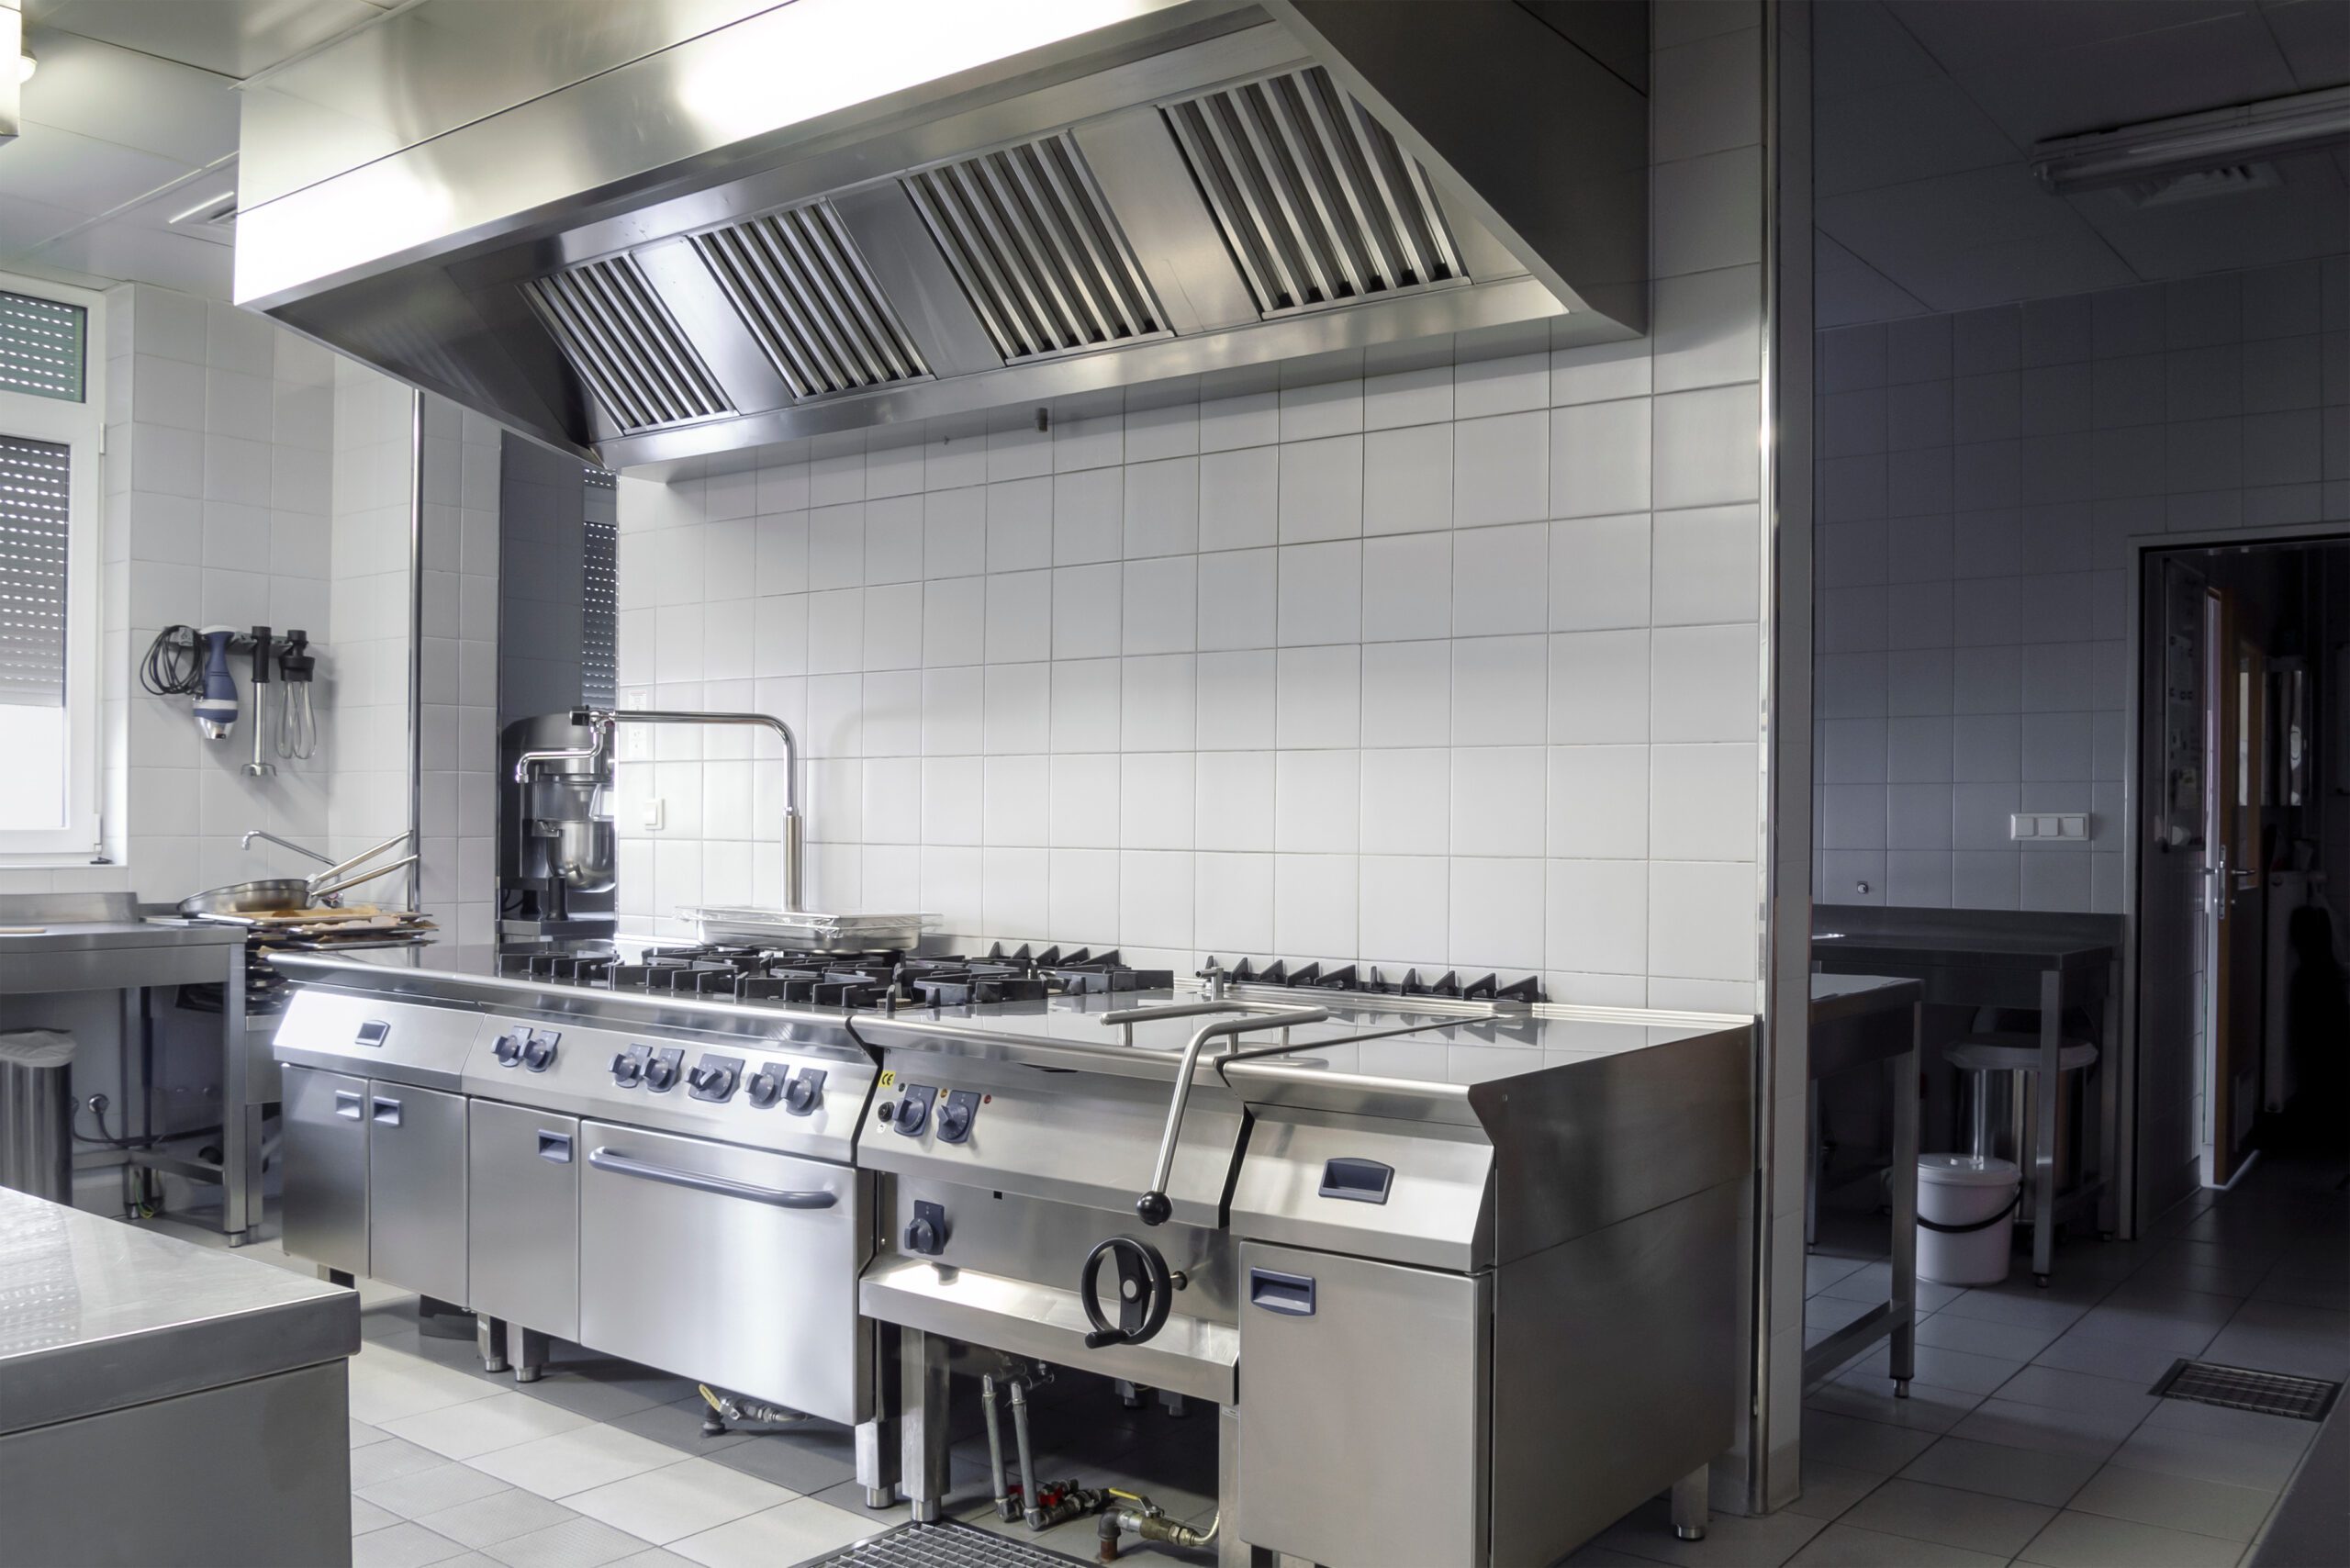 Fire-Resistant Materials in Kitchen Design: A Safety Priority